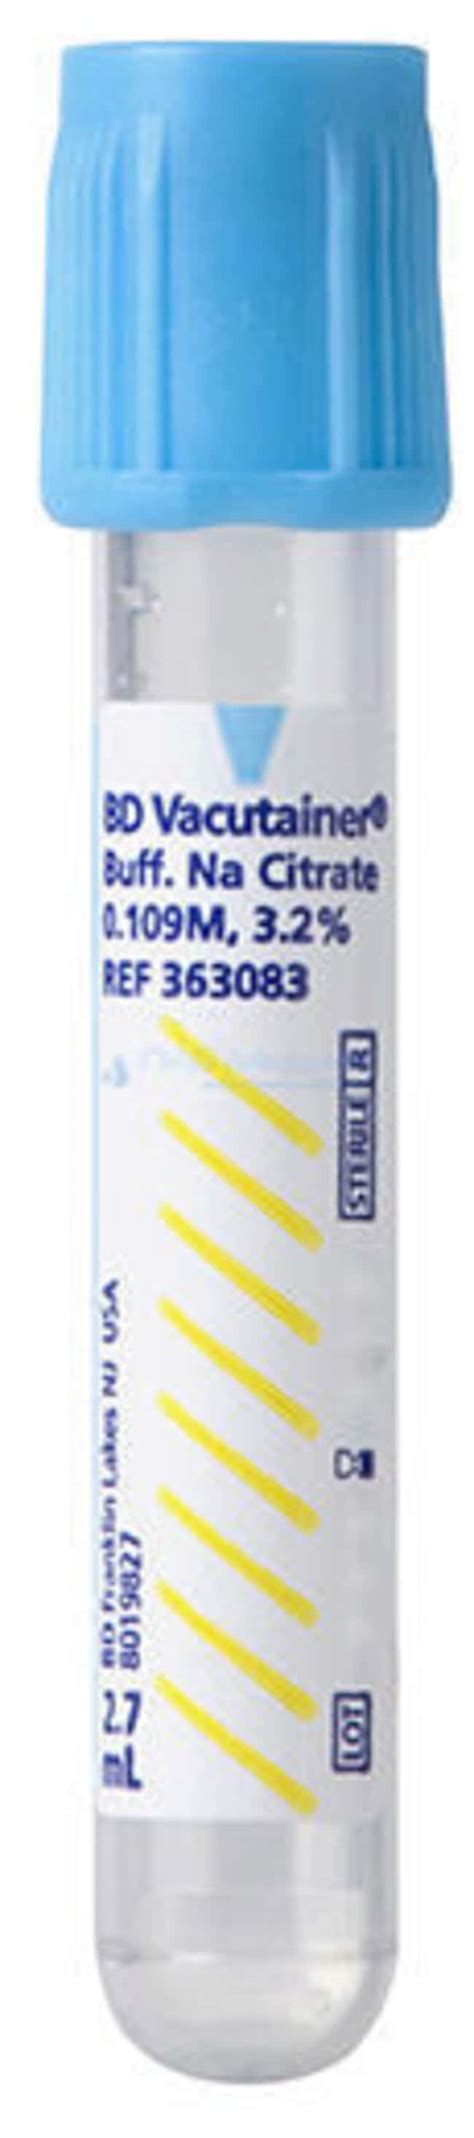 Bd Vacutainer Citrate Tube Patient Care Products First Aid And My Xxx Hot Girl